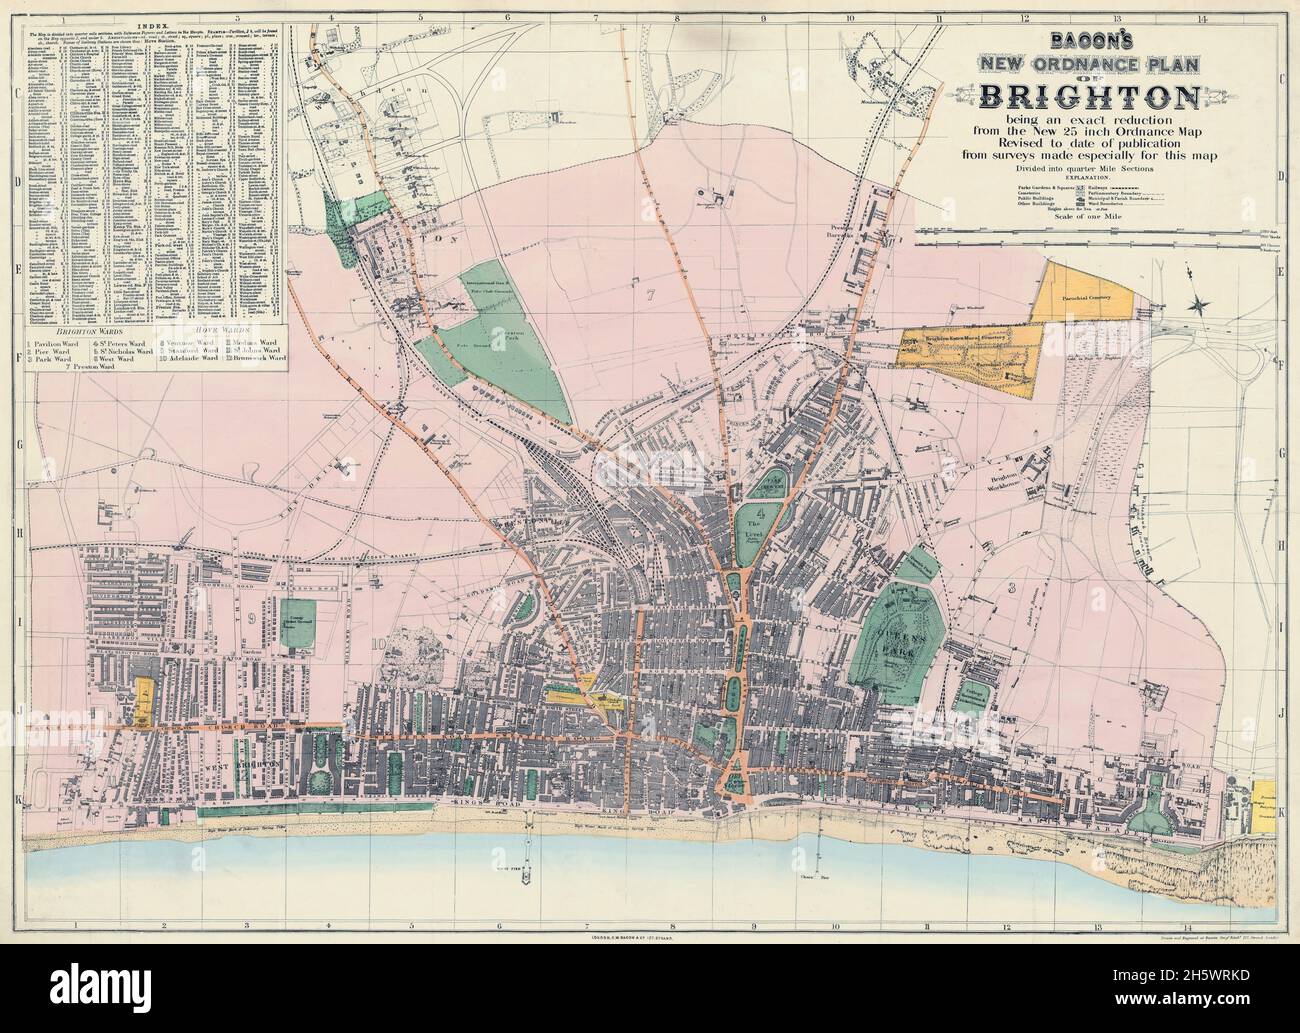 Map of Brighton and adjoining parts of Hove. Historical streetmap, Brighton, England, United Kingdom. BACON'S NEW ORDNANCE PLAN OF BRIGHTON.  GW. Bacon (born US 1830, died UK 1922) was a prolific London based book and map publisher active in the mid to late 19th century. Bacon's firm G.W. Bacon and Co. produced a wide variety of maps and guides. Stock Photo